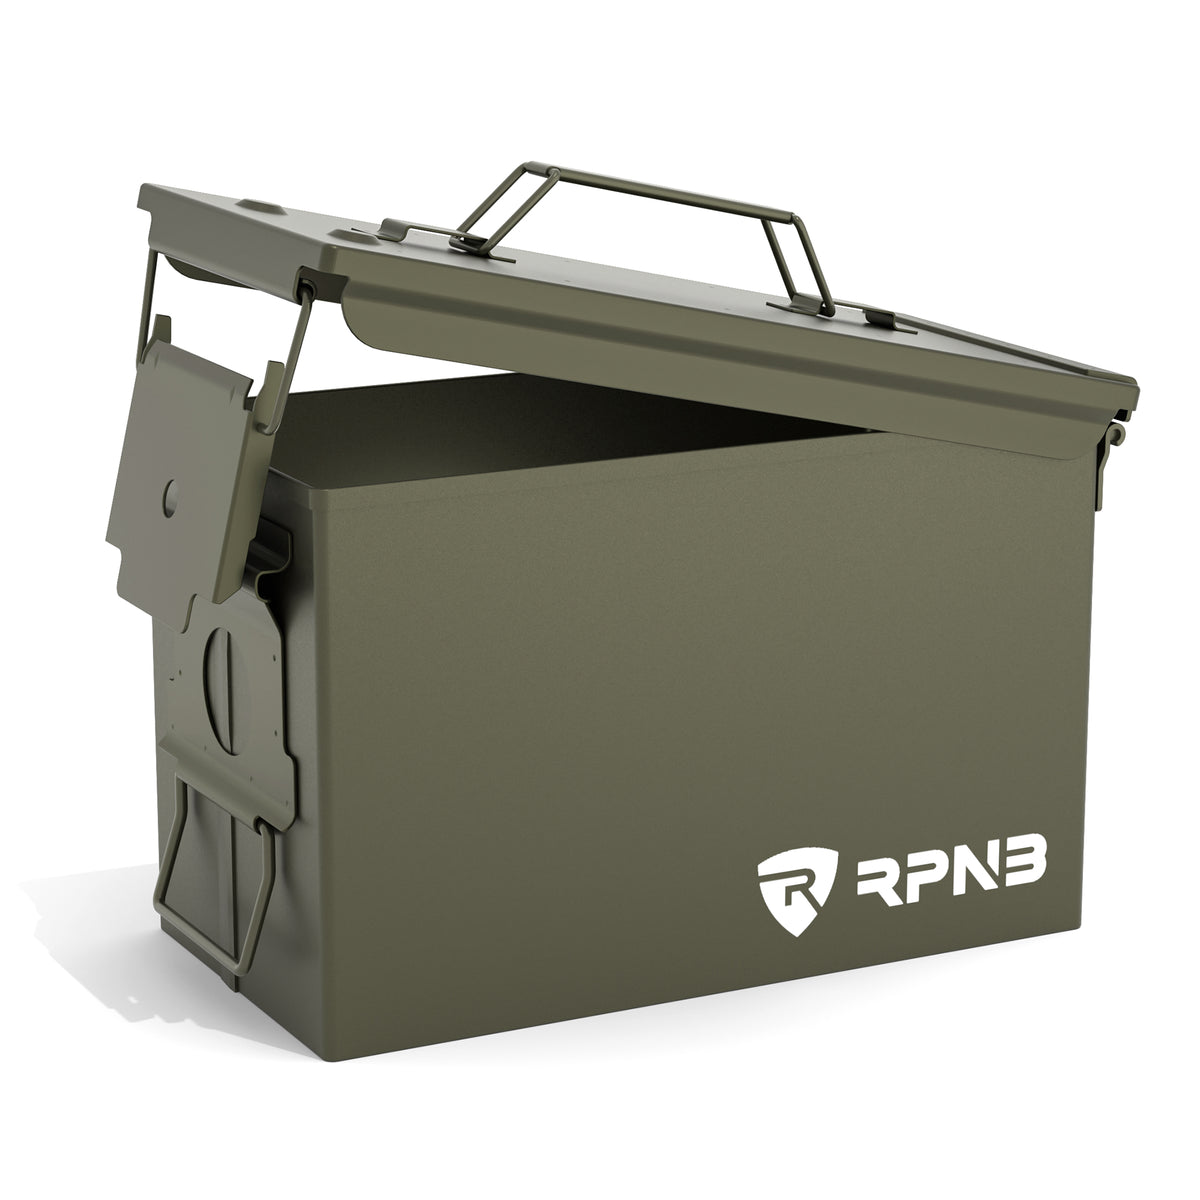 RPNB AM192 Metal Ammo Can .50 Cal Military Heavy Gauge Water